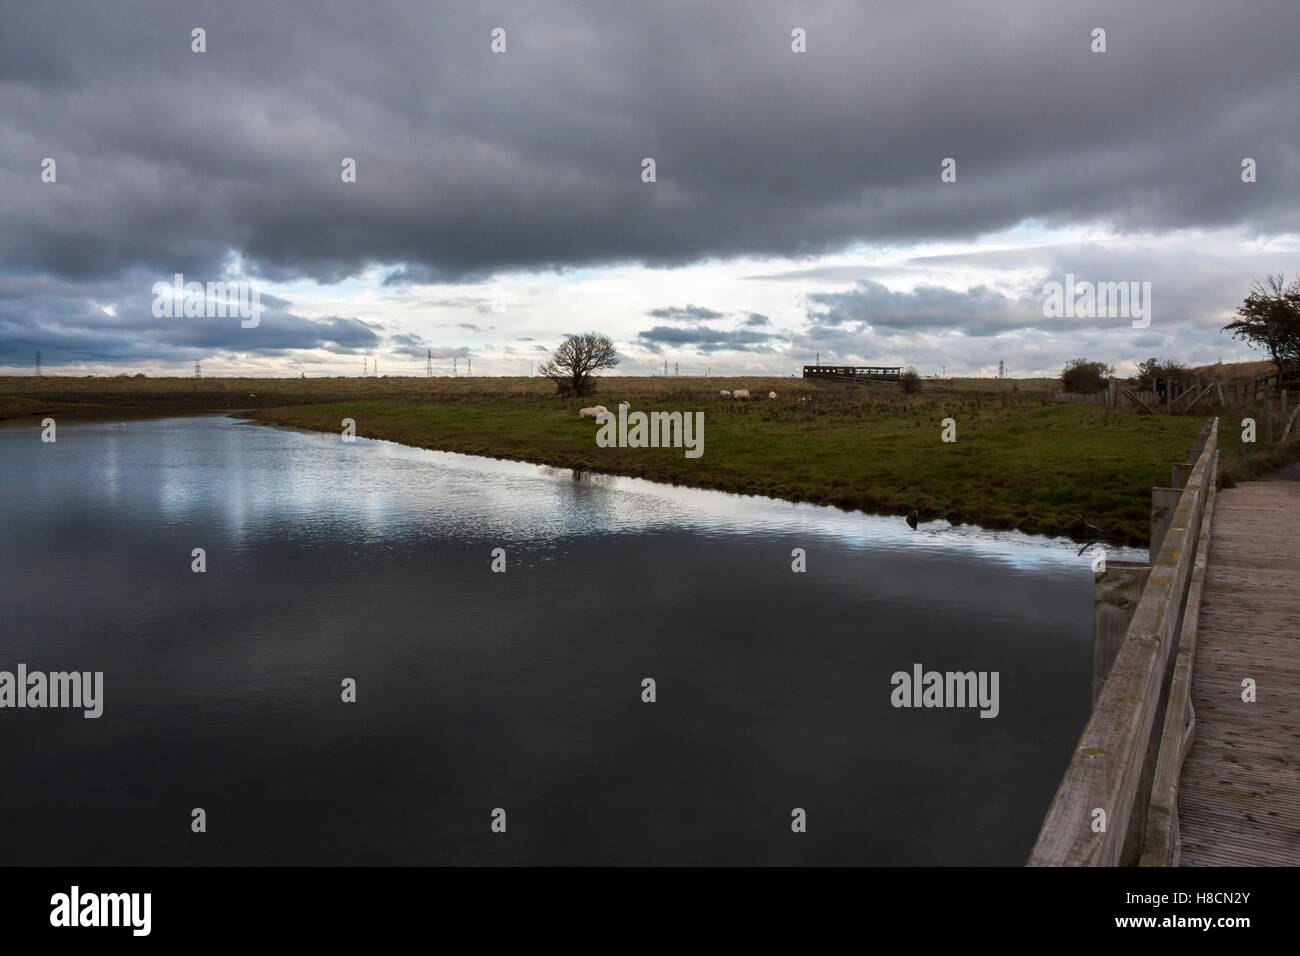 The approach to the wildlife viewing station at Greatham Creek in Hartlepool showing the darkening sky and reflections Stock Photo